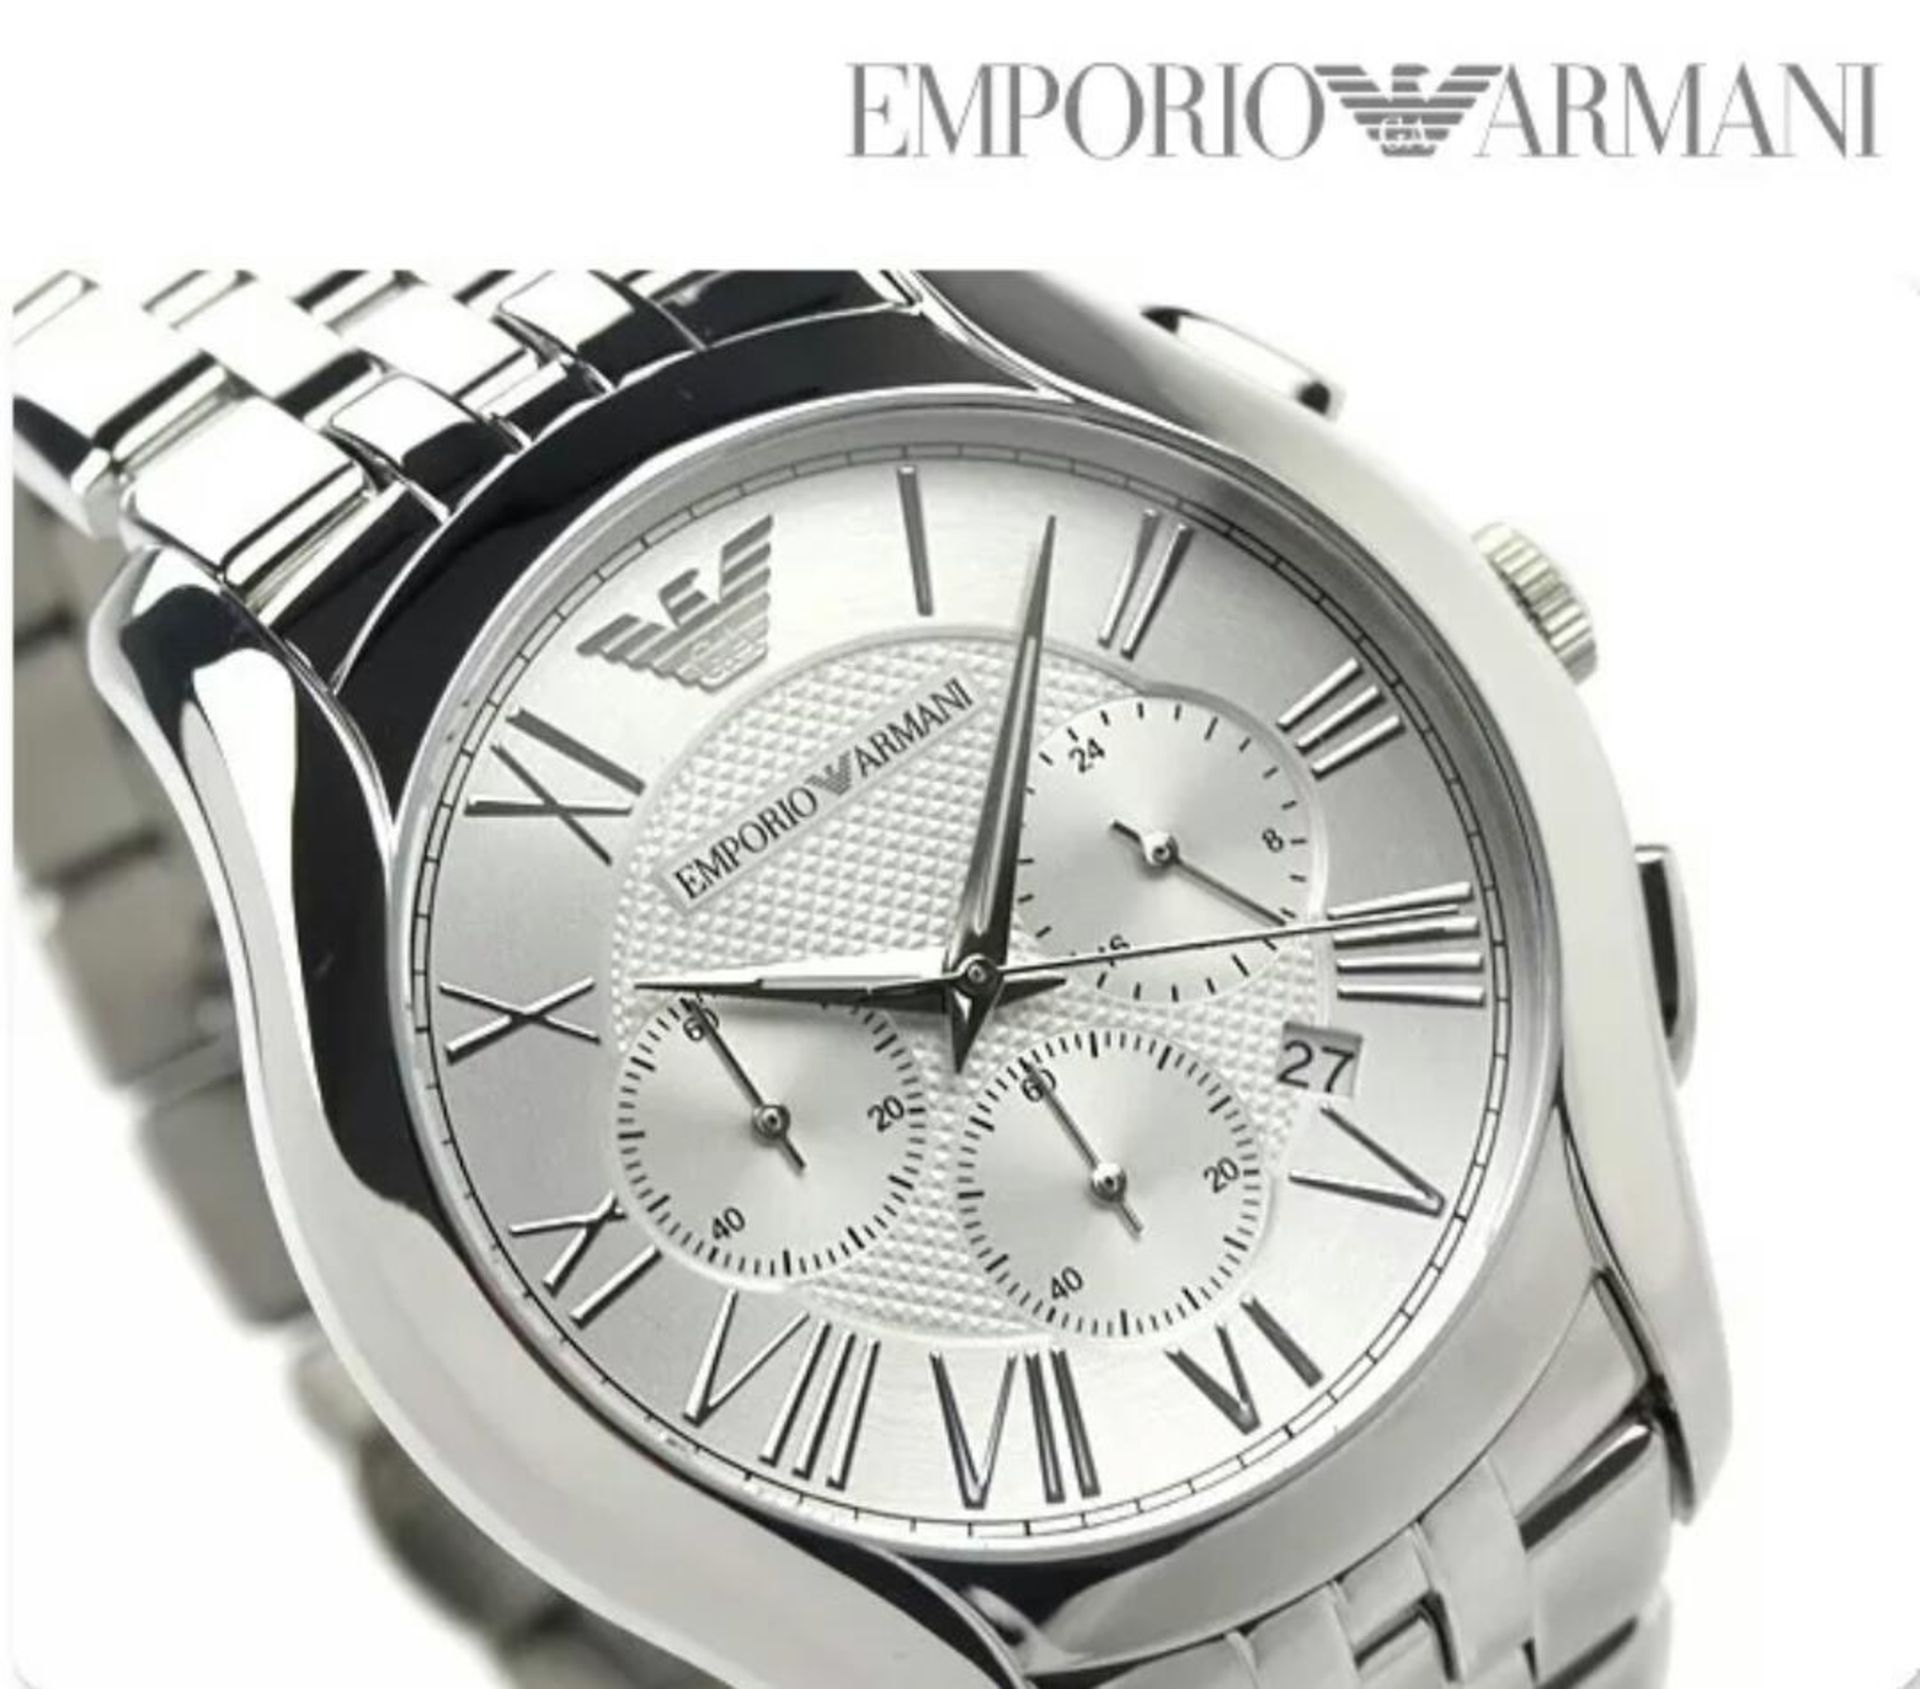 BRAND NEW EMPORIO ARMANI AR1702, GENTS CLASSIC SILVER TONE CHRONOGRAPH STAINLESS STEEL WATCH -